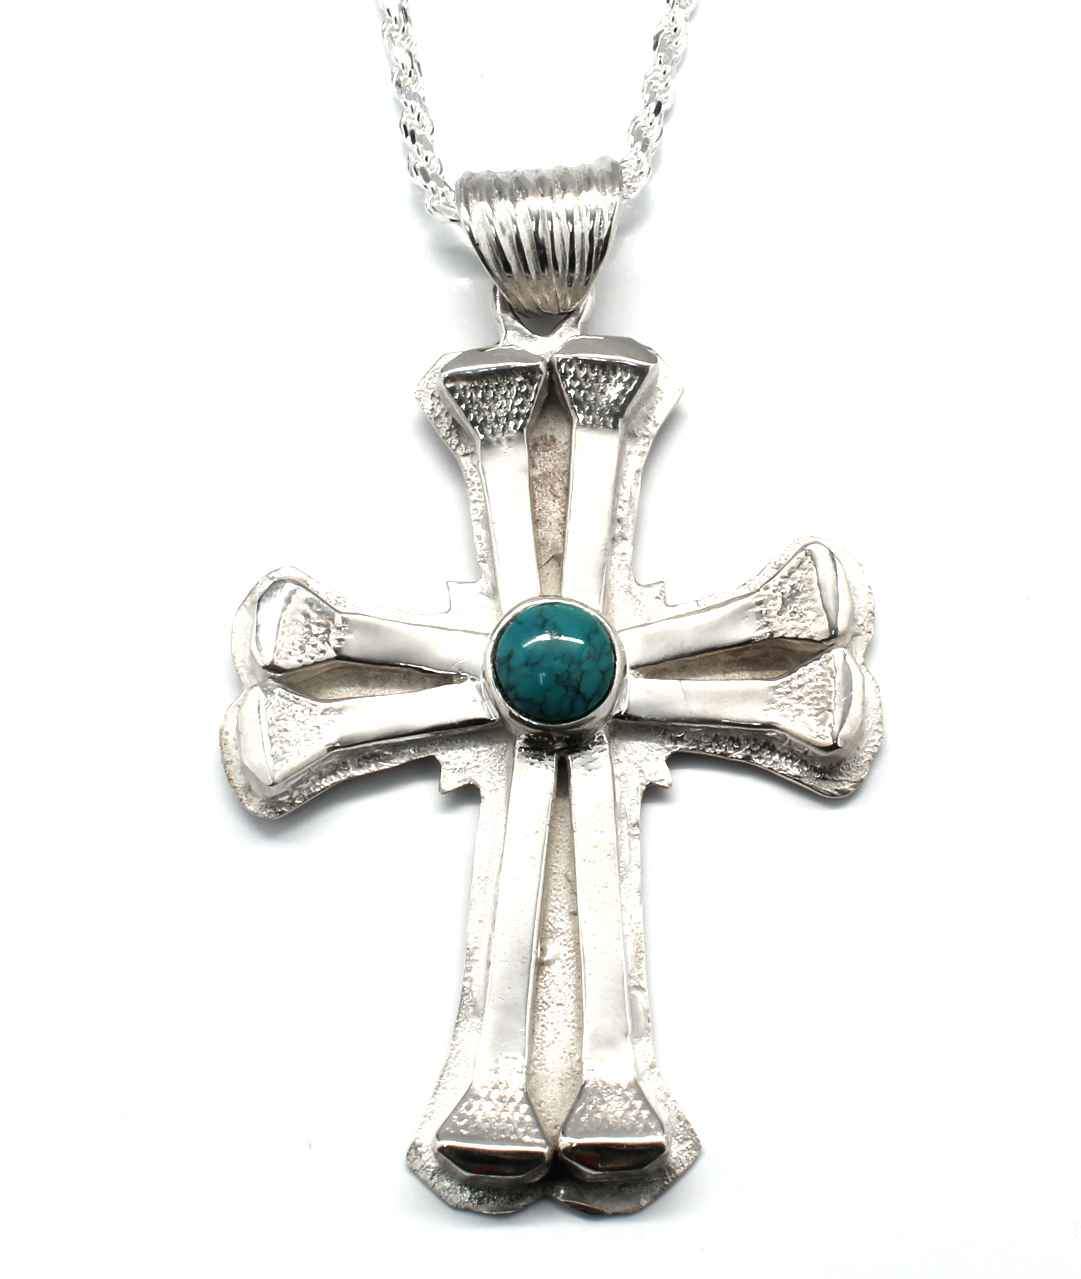 Ben Nighthorse-Sorrel Sky Gallery-Jewelry-Large Eight Nail Cross